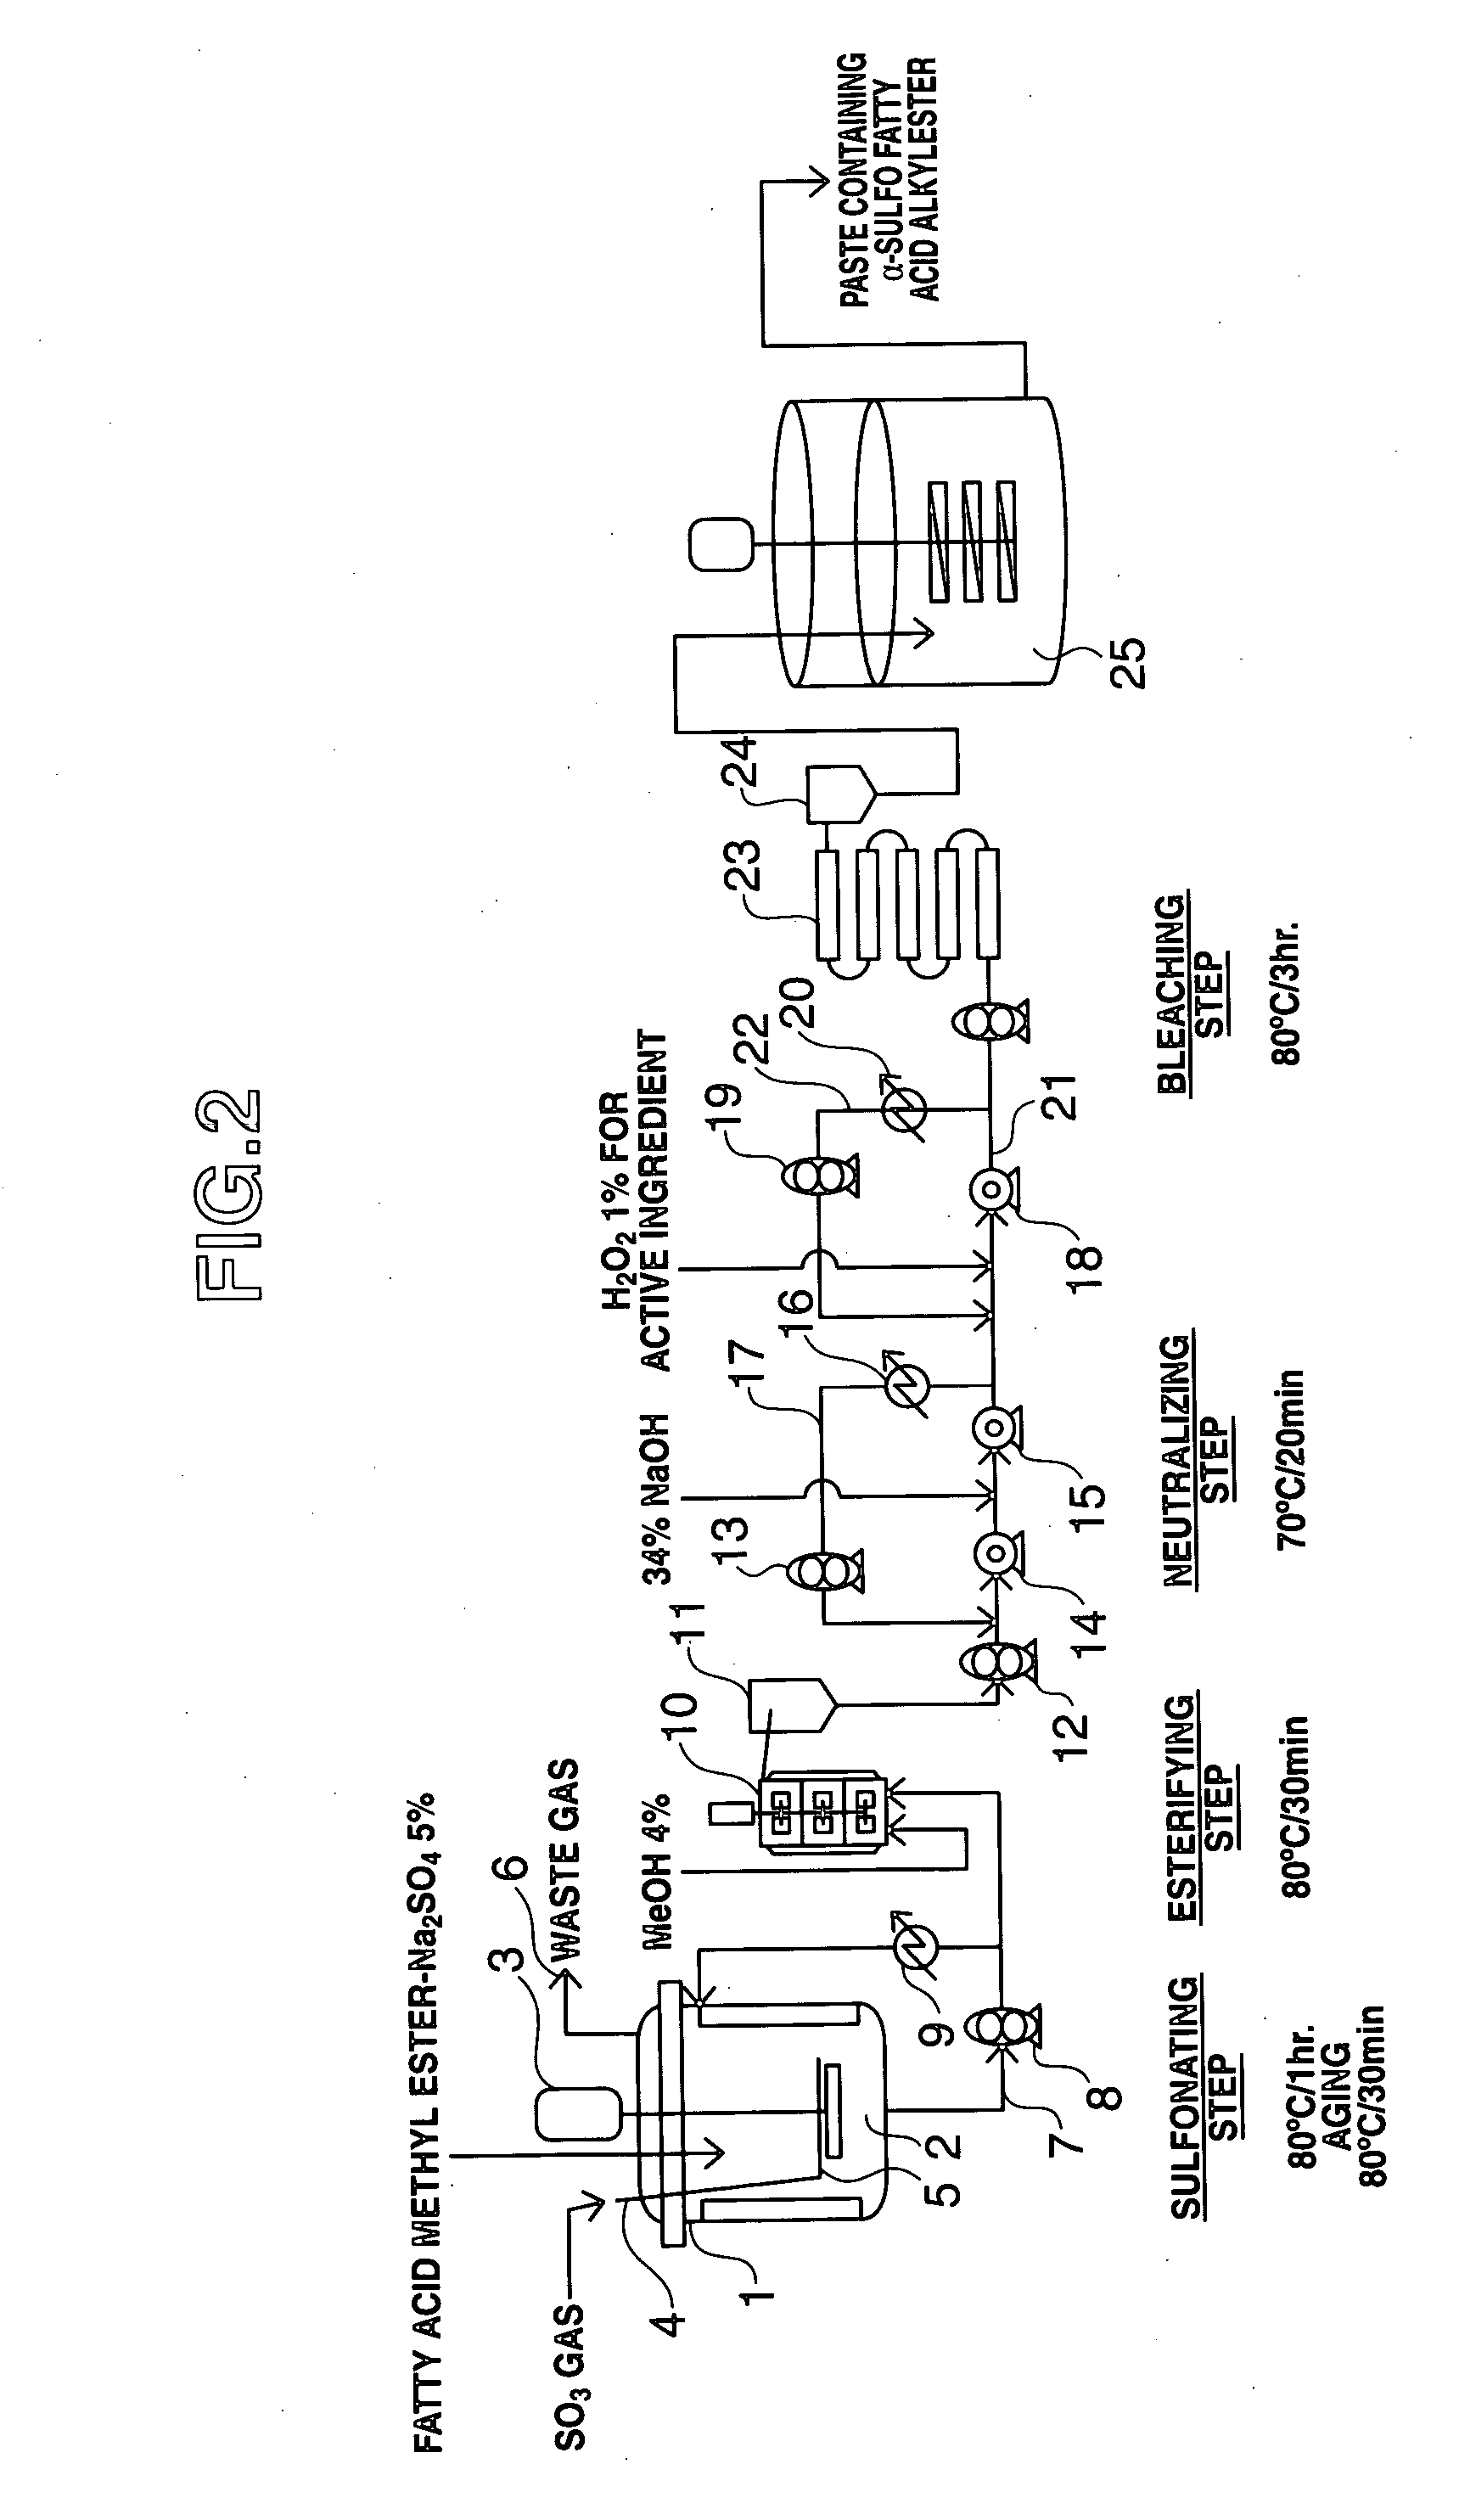 Powders, flakes, or pellets containing salts of a sulfo fatty acid alkyl esters in high concentrations, process for production thereof, granulated detergents, and process for production thereof